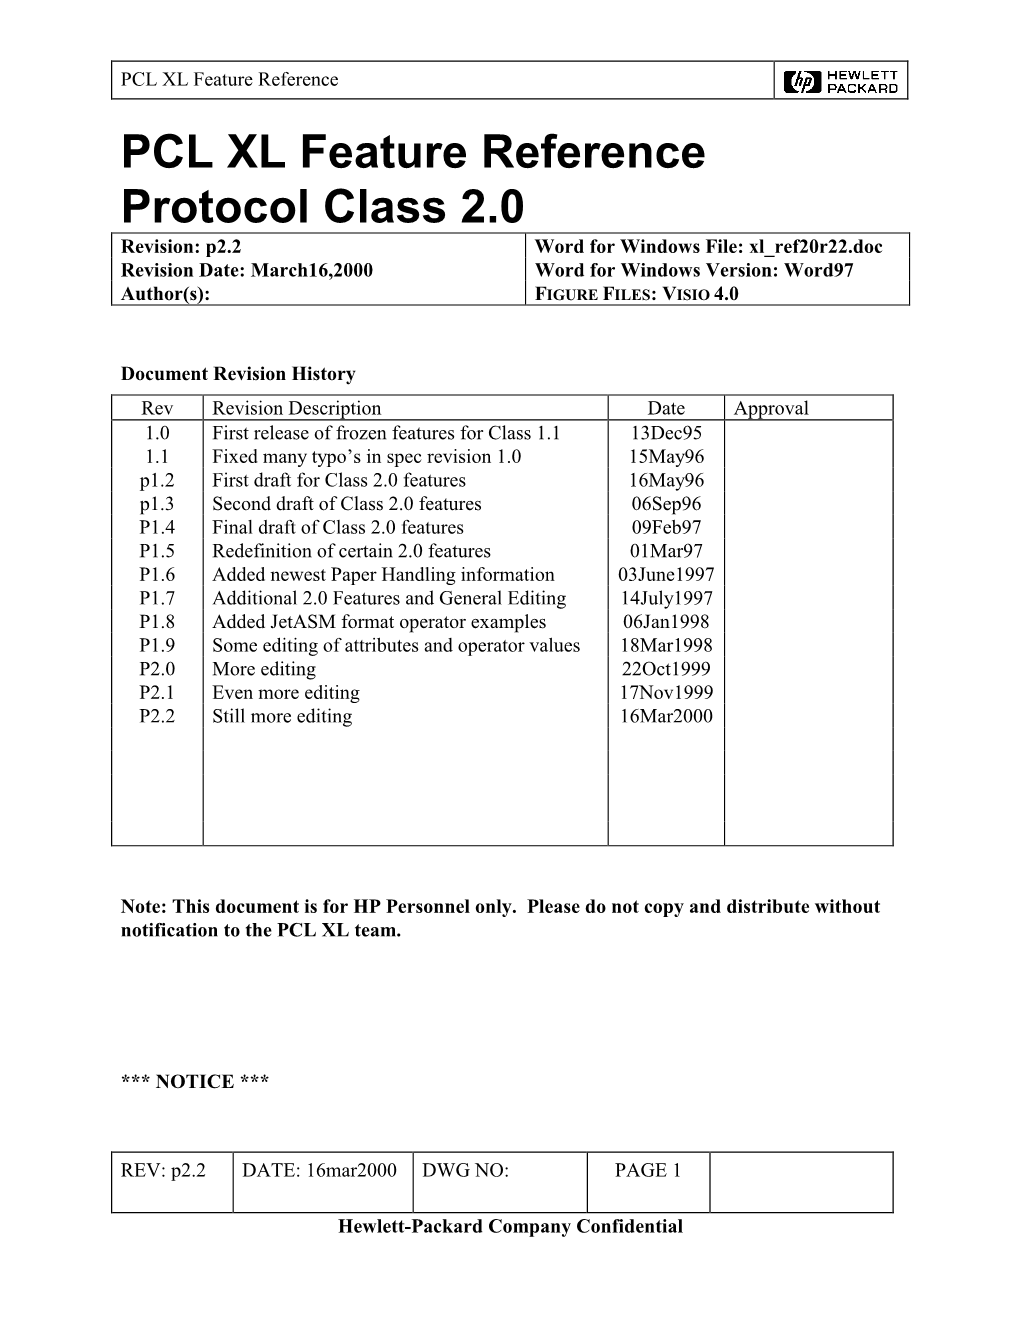 PCL XL Feature Reference Protocol Class